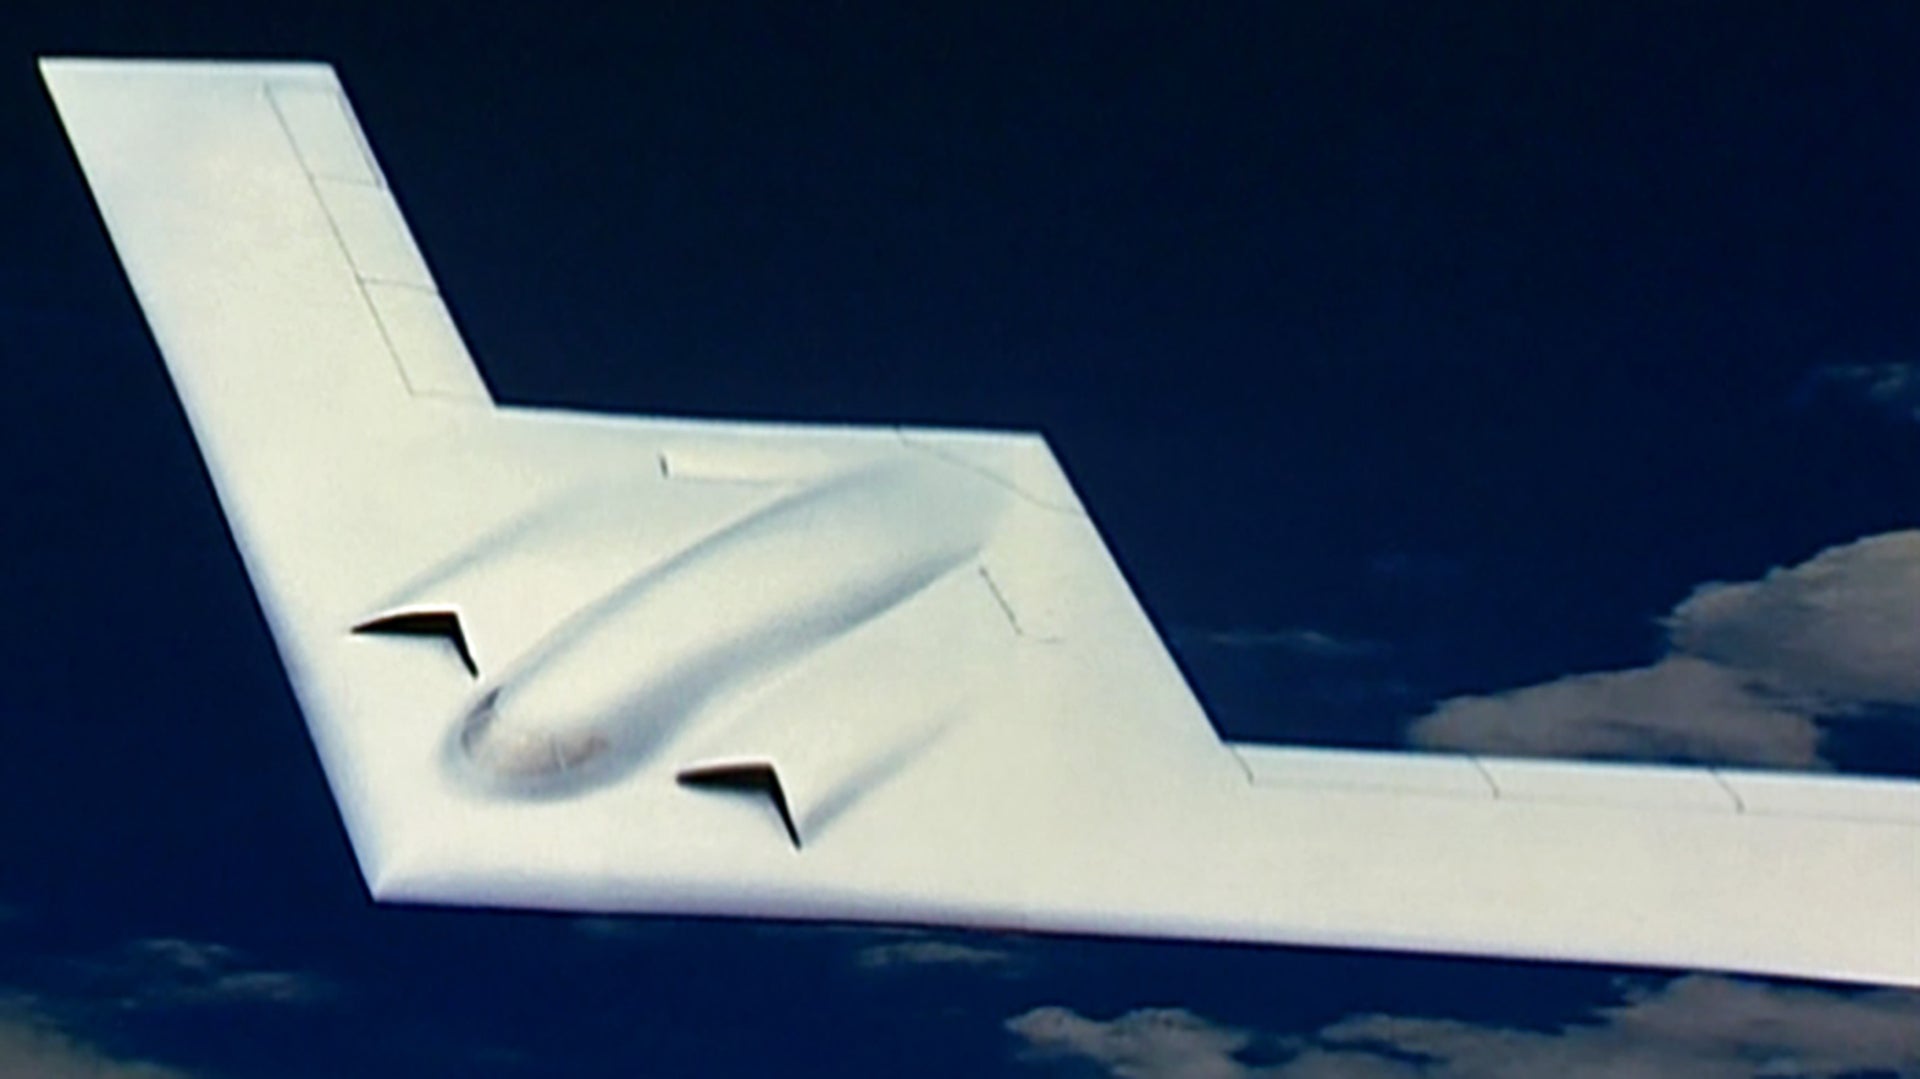 The B-21’s Three Decade Old Shape Hints At New High Altitude Capabilities